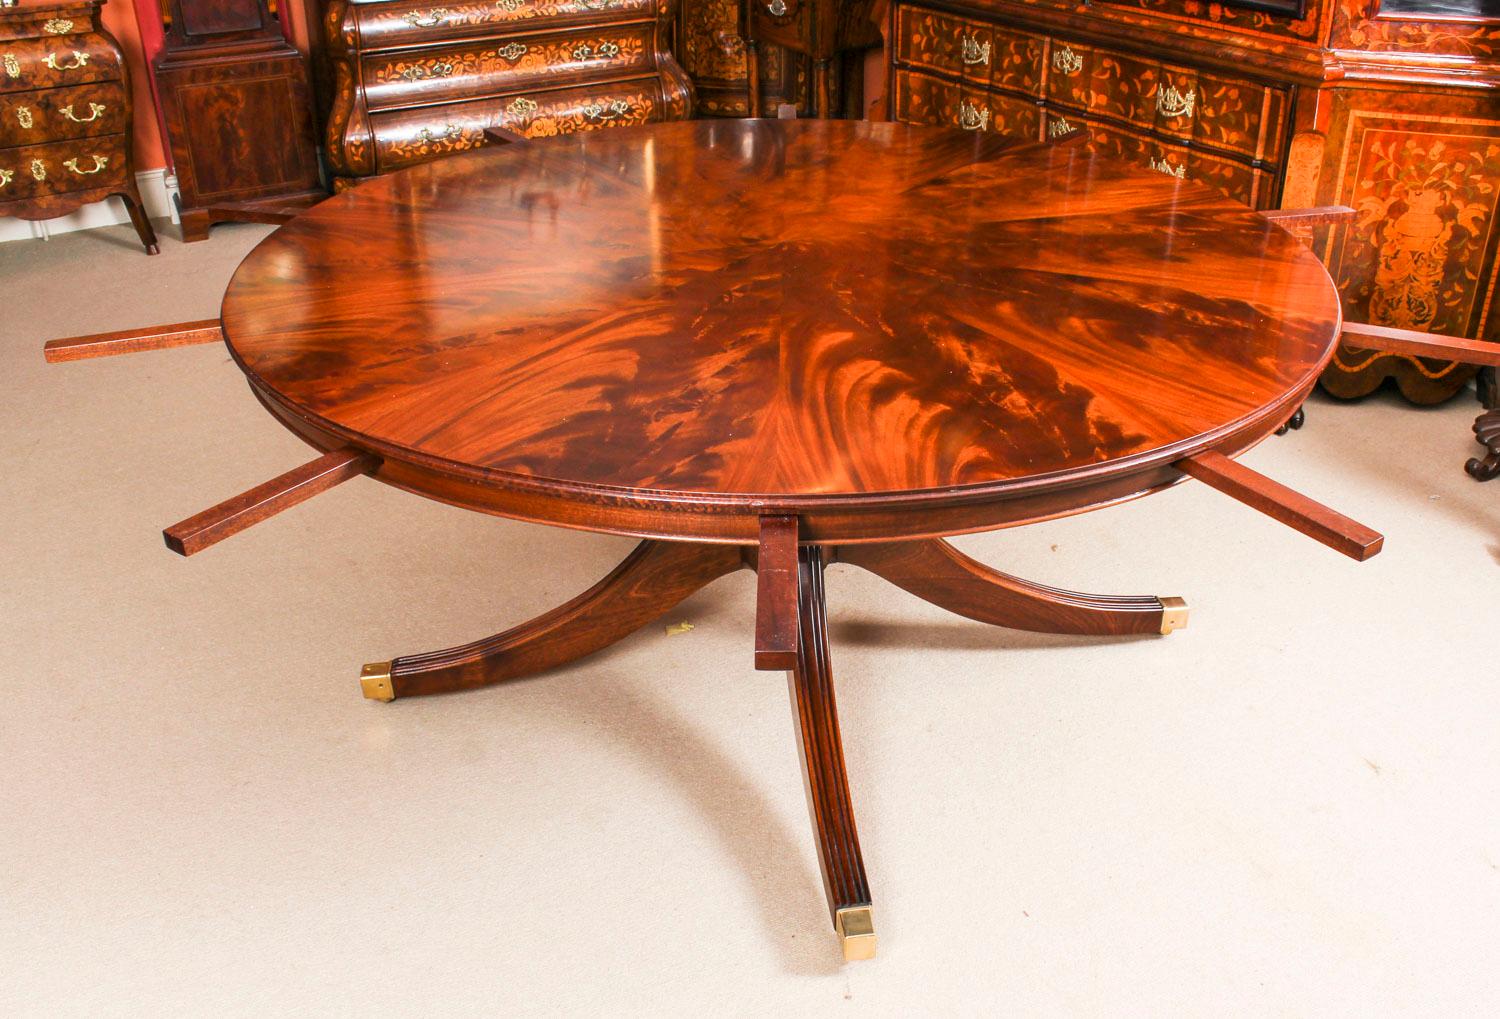 Vintage Flame Mahogany Jupe Dining Table and 10 Chairs, Mid-20th Century 4